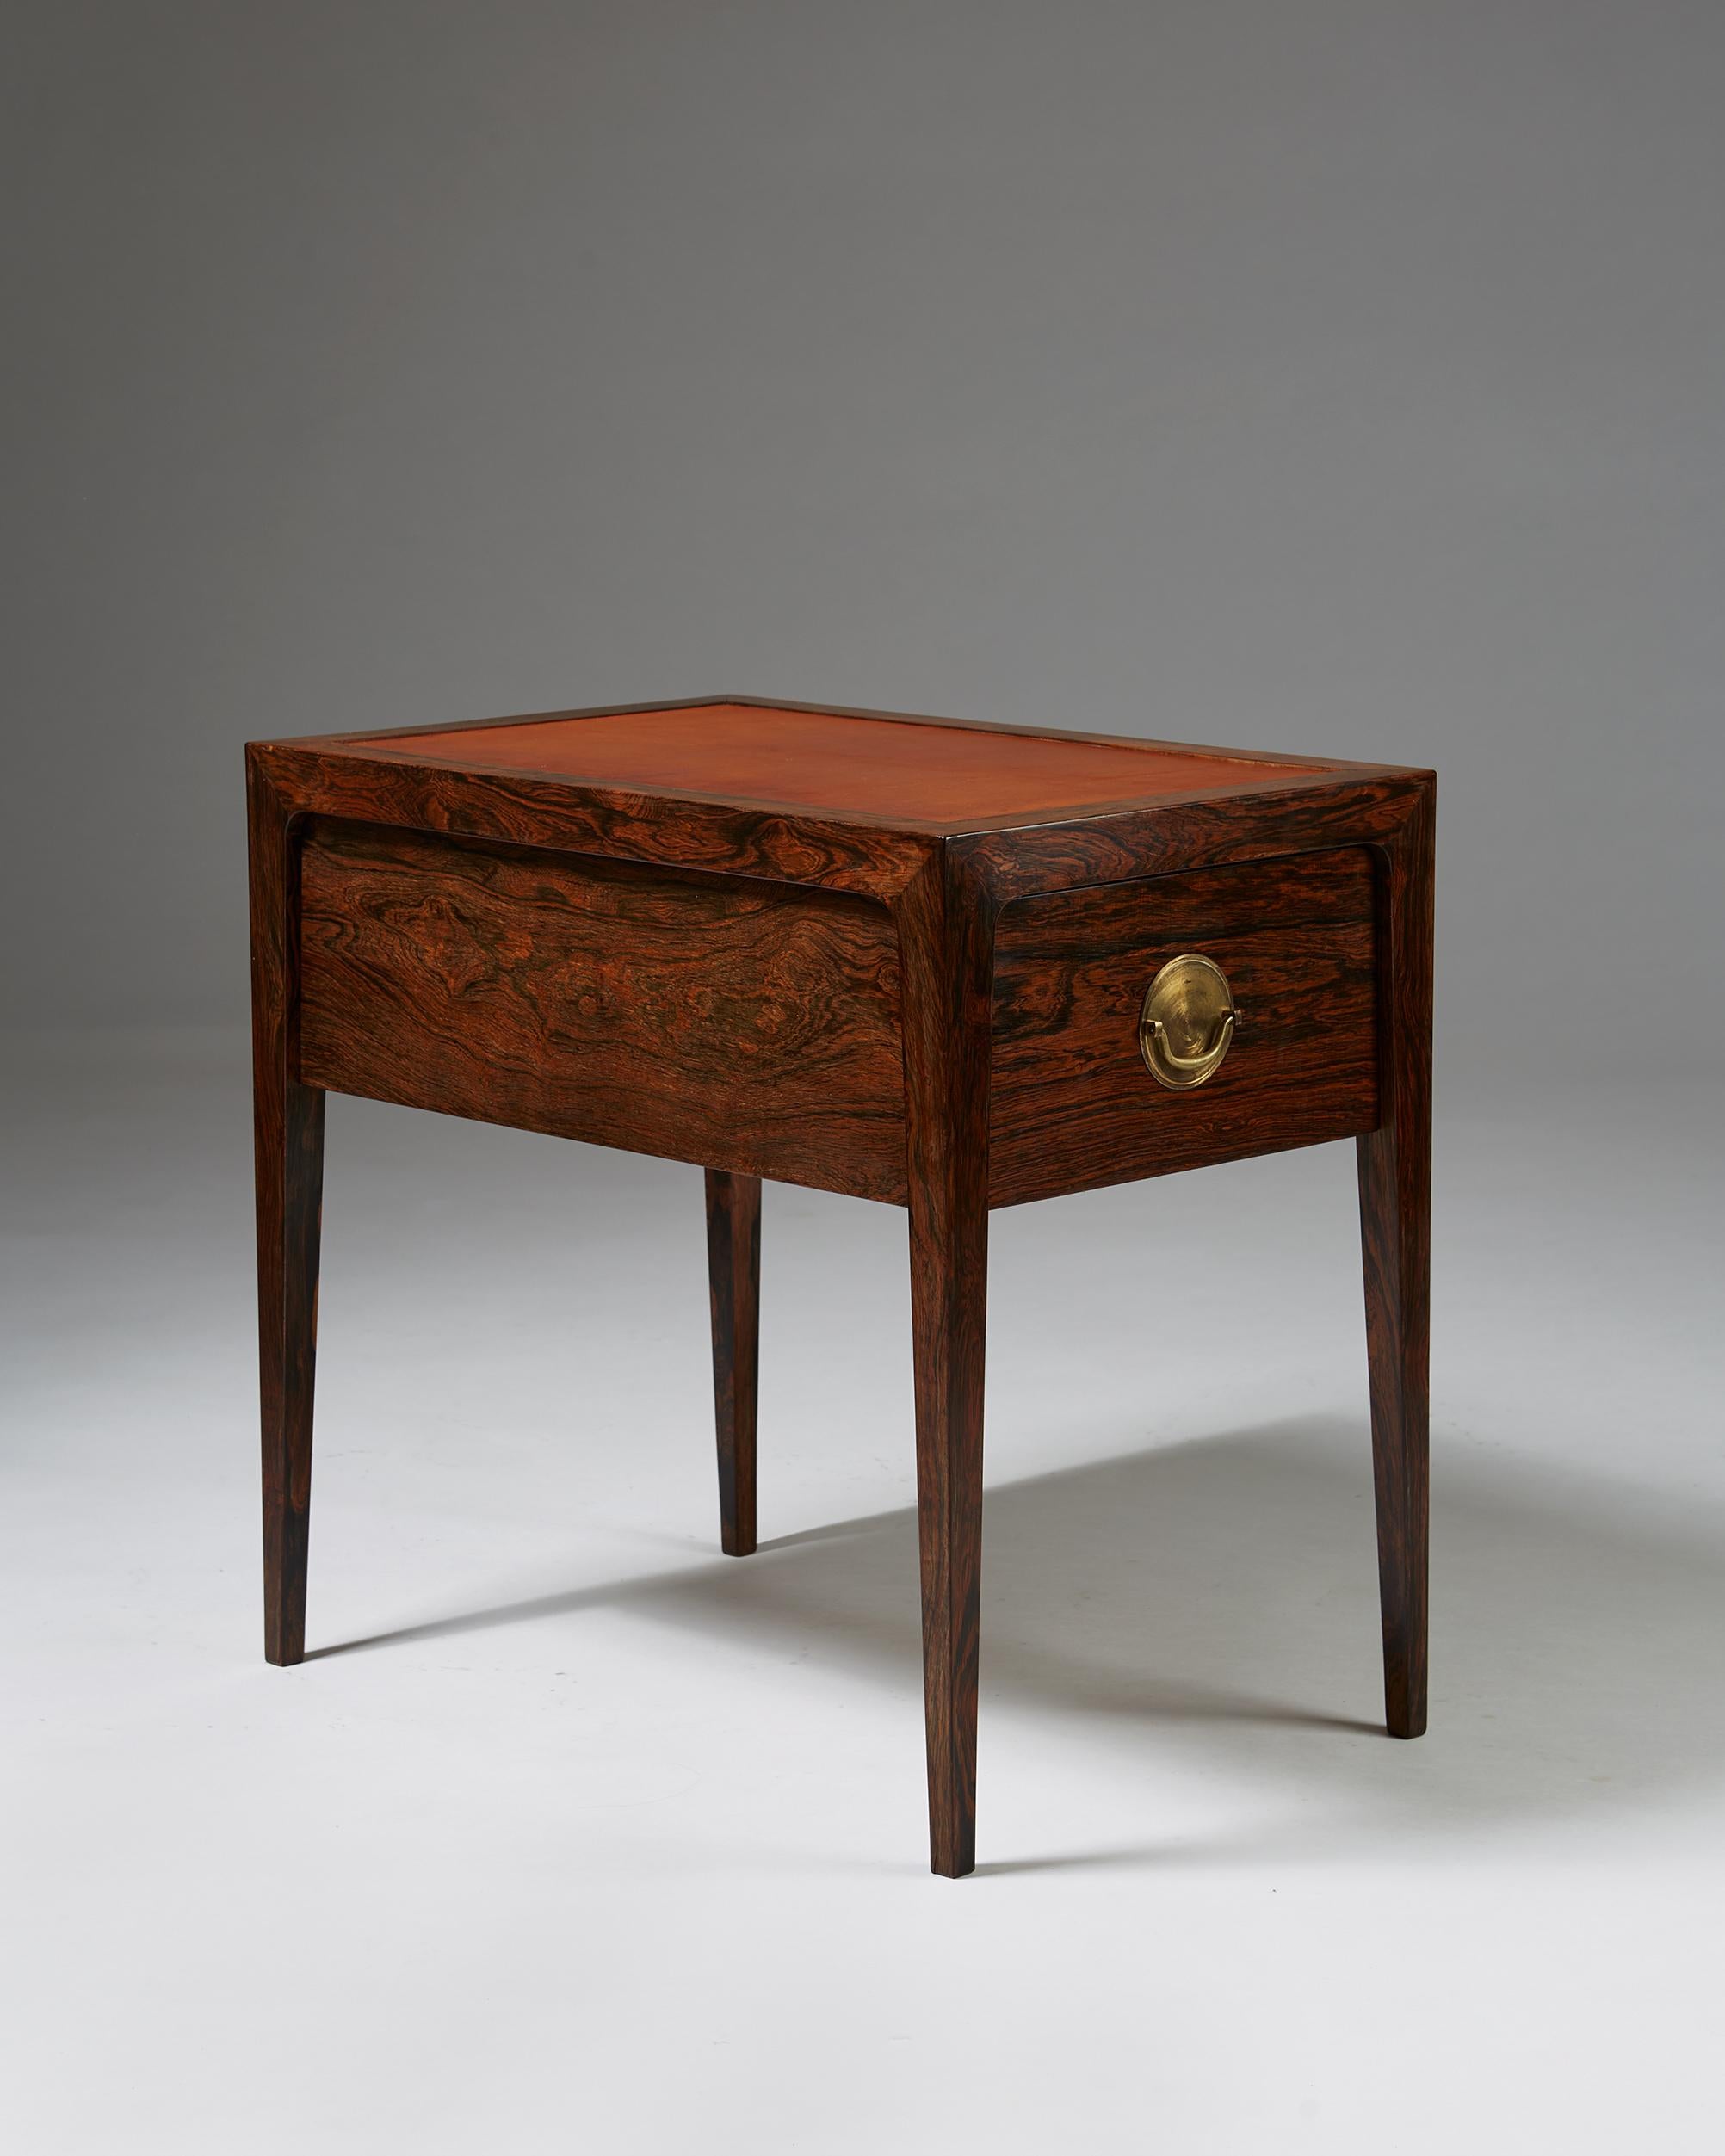 Bedside table designed by Helge Brandt, Denmark, 1963. 

Rosewood and leather.

Dimensions: 
H: 55 cm/ 21 2/3